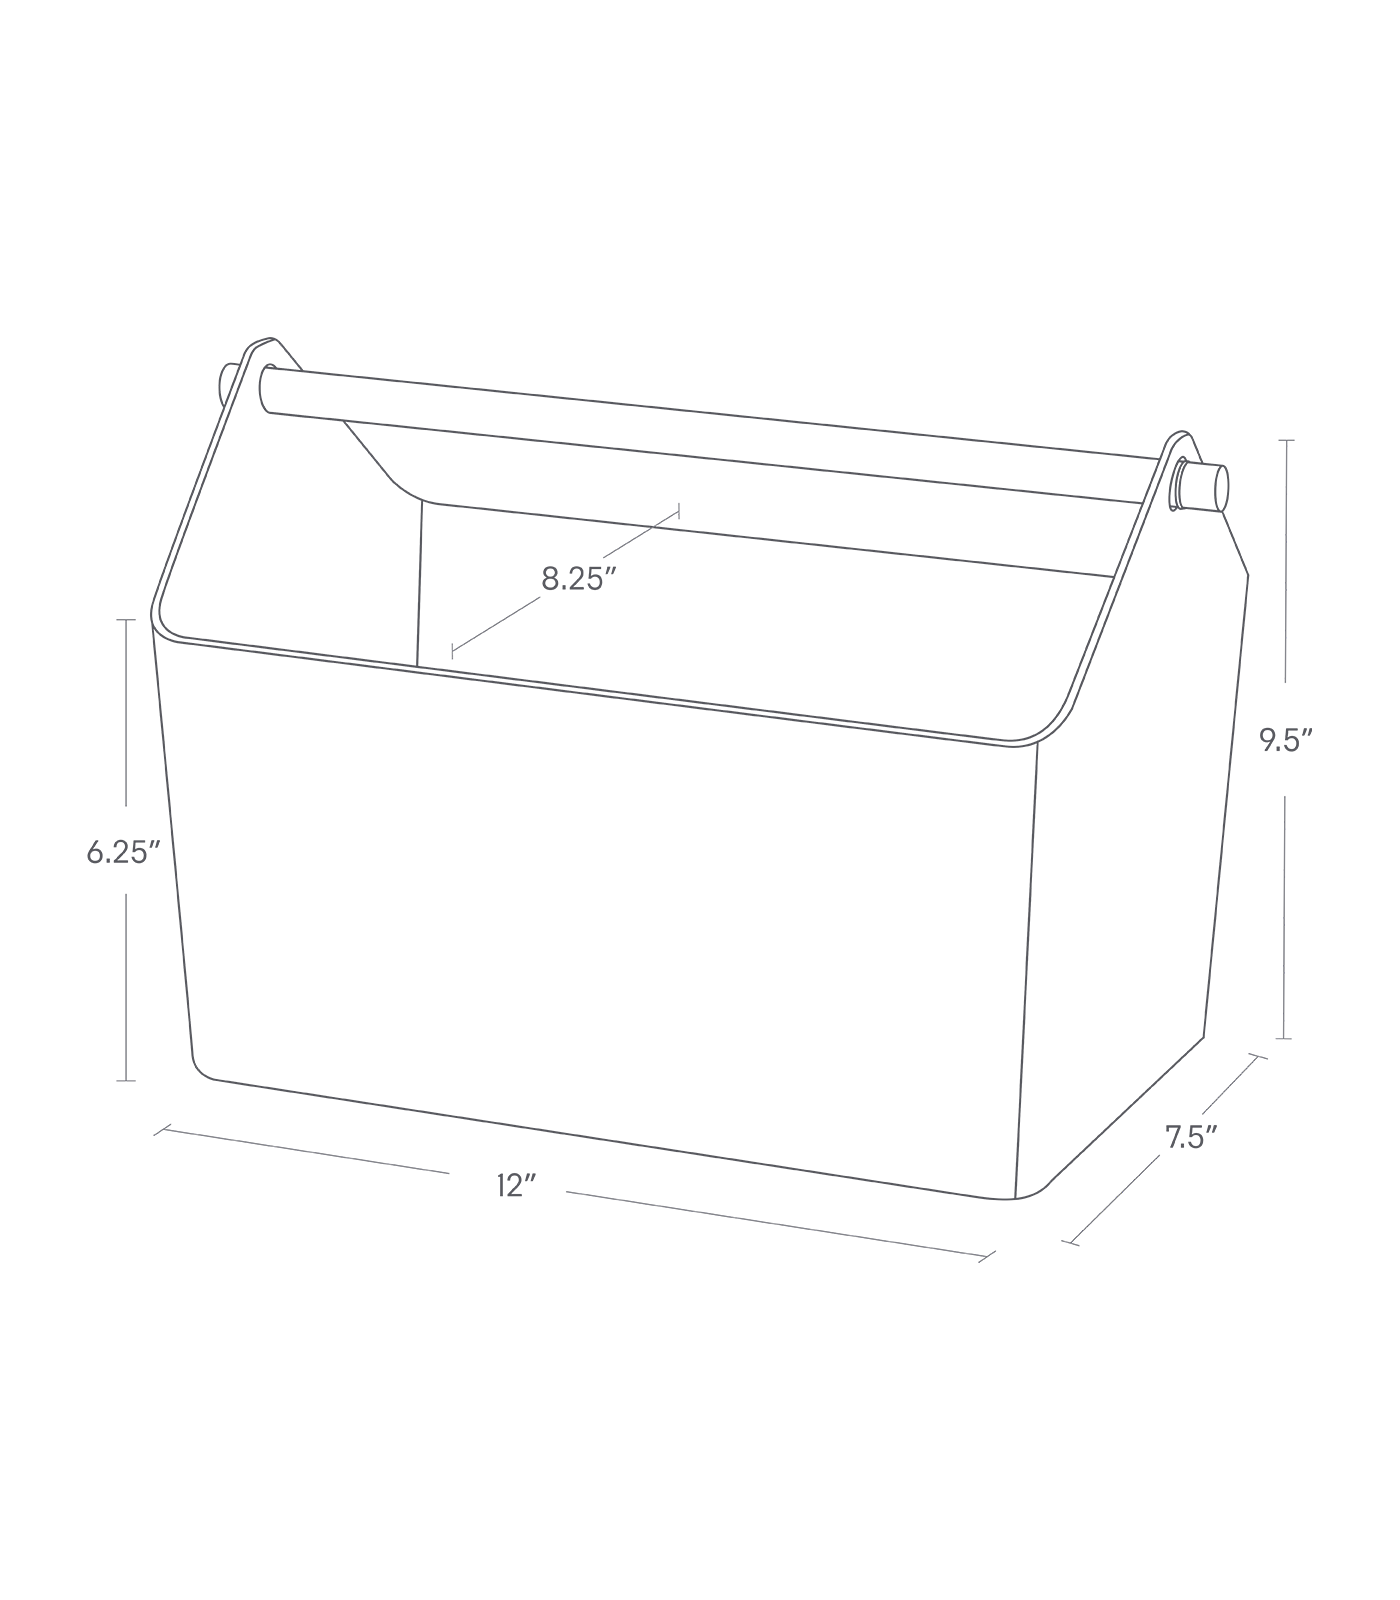 Dimension image for Storage Caddy on a white background including dimensions  L 8.27 x W 14.57 x H 9.45 inches